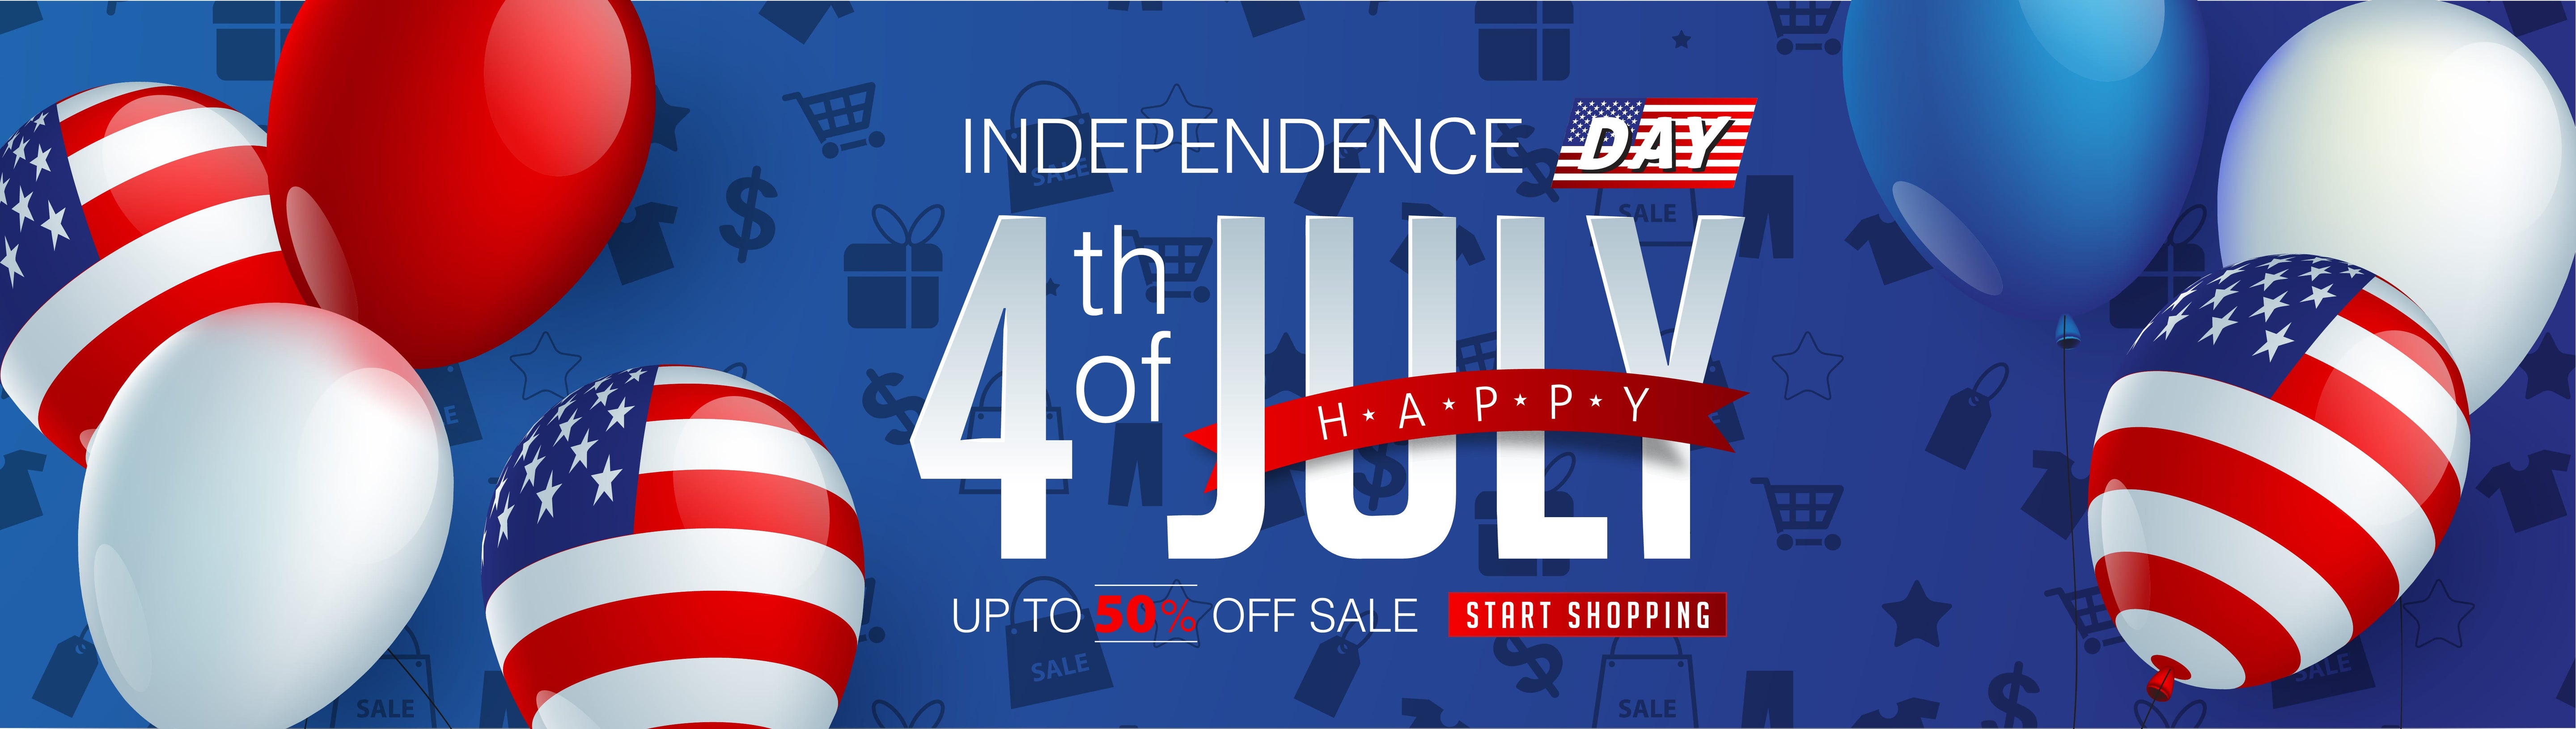 4th of July SALE